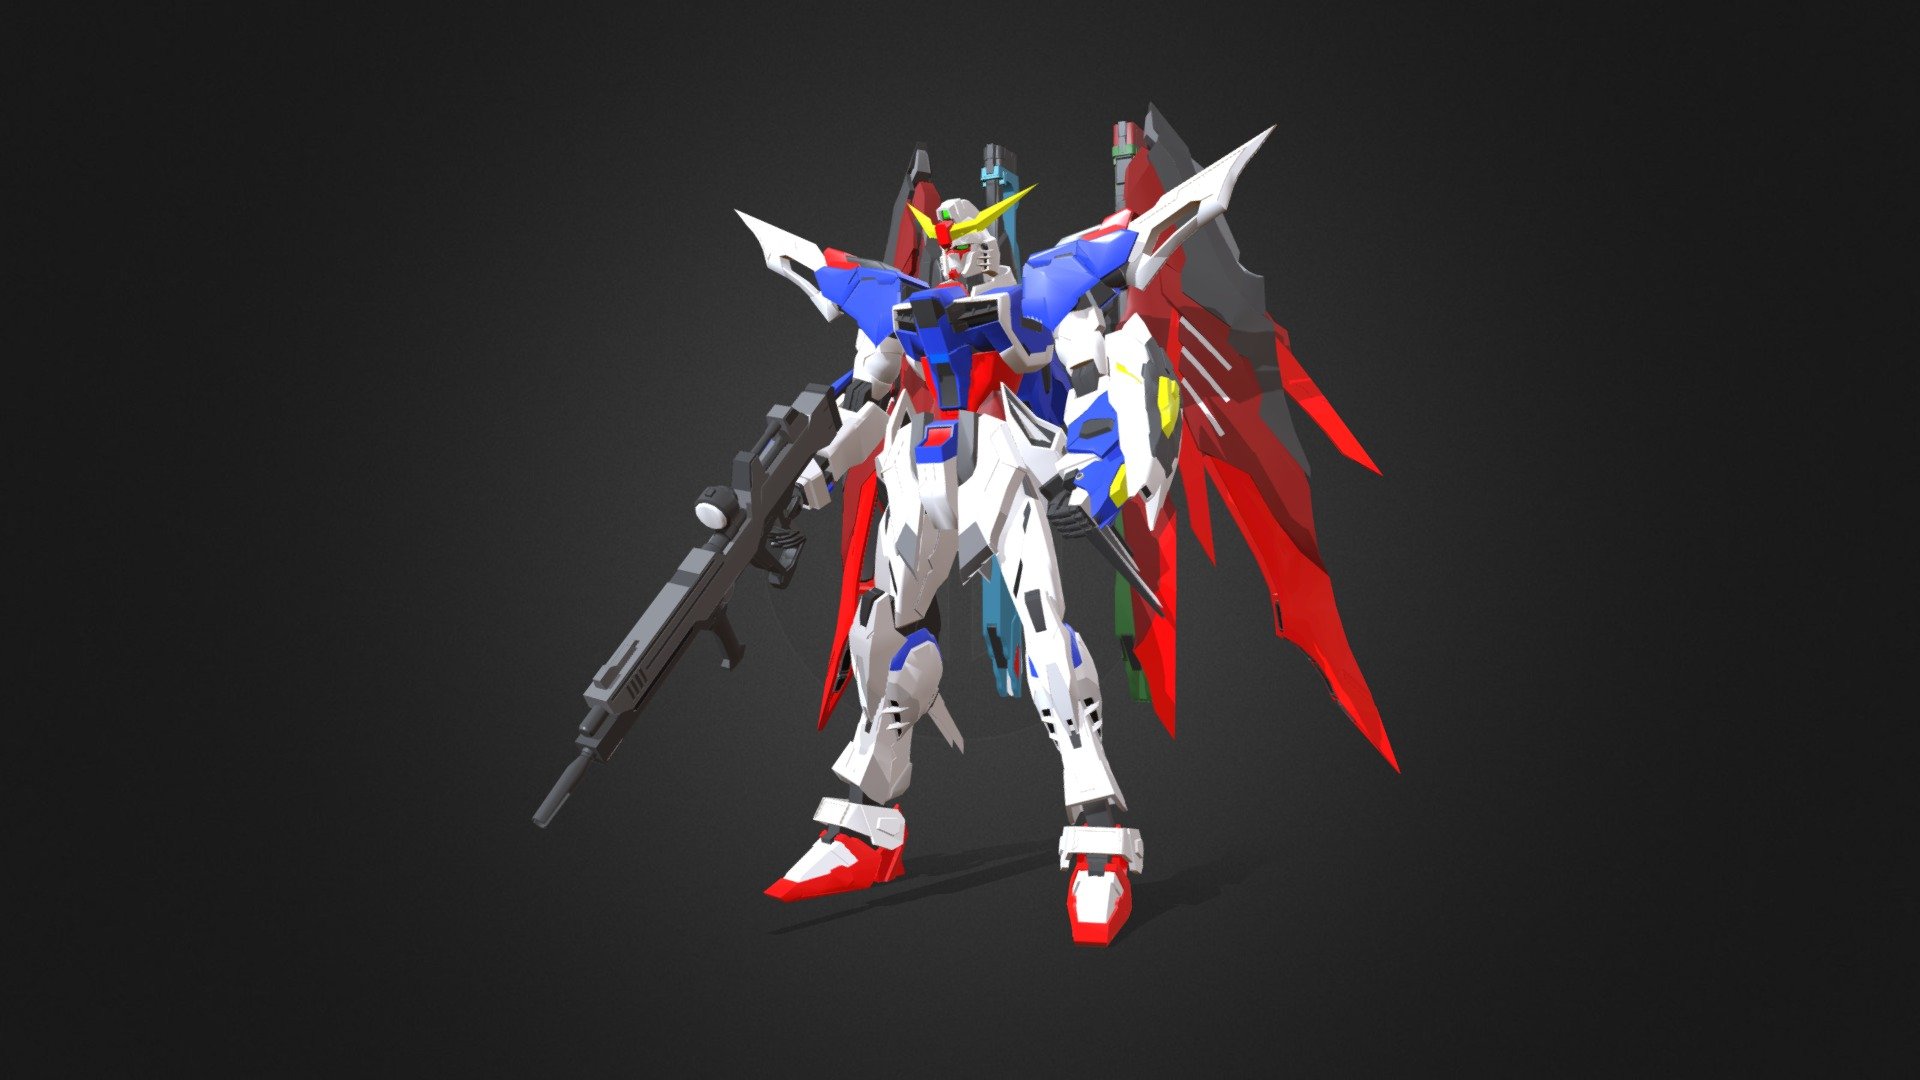 The ZGMF-X42S Destiny Gundam is the titular mobile suit of Mobile Suit Gundam SEED Destiny and was piloted by Shinn Asuka. A straight-built Gunpla version is piloted by Shimon Izuna in Gundam Build Fighters Try 3d model